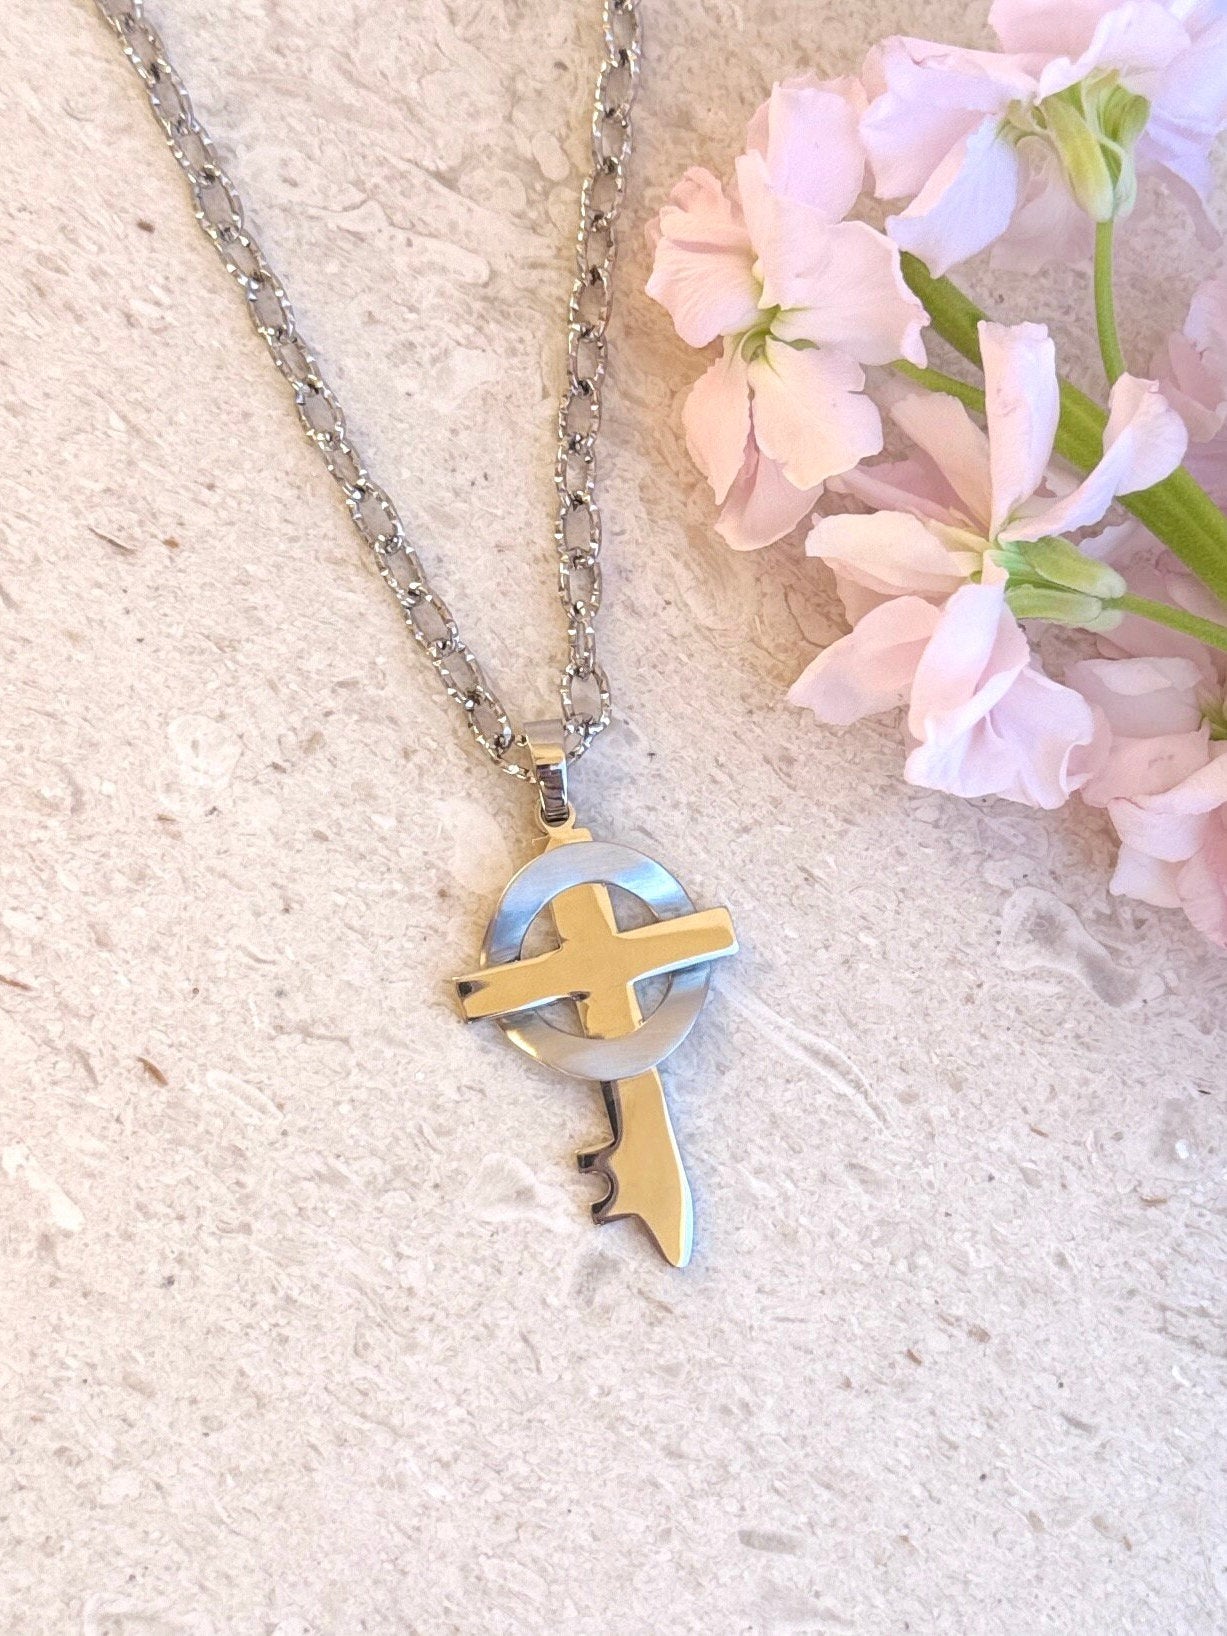 Groom Mother Gift Large Silver Cross Necklace